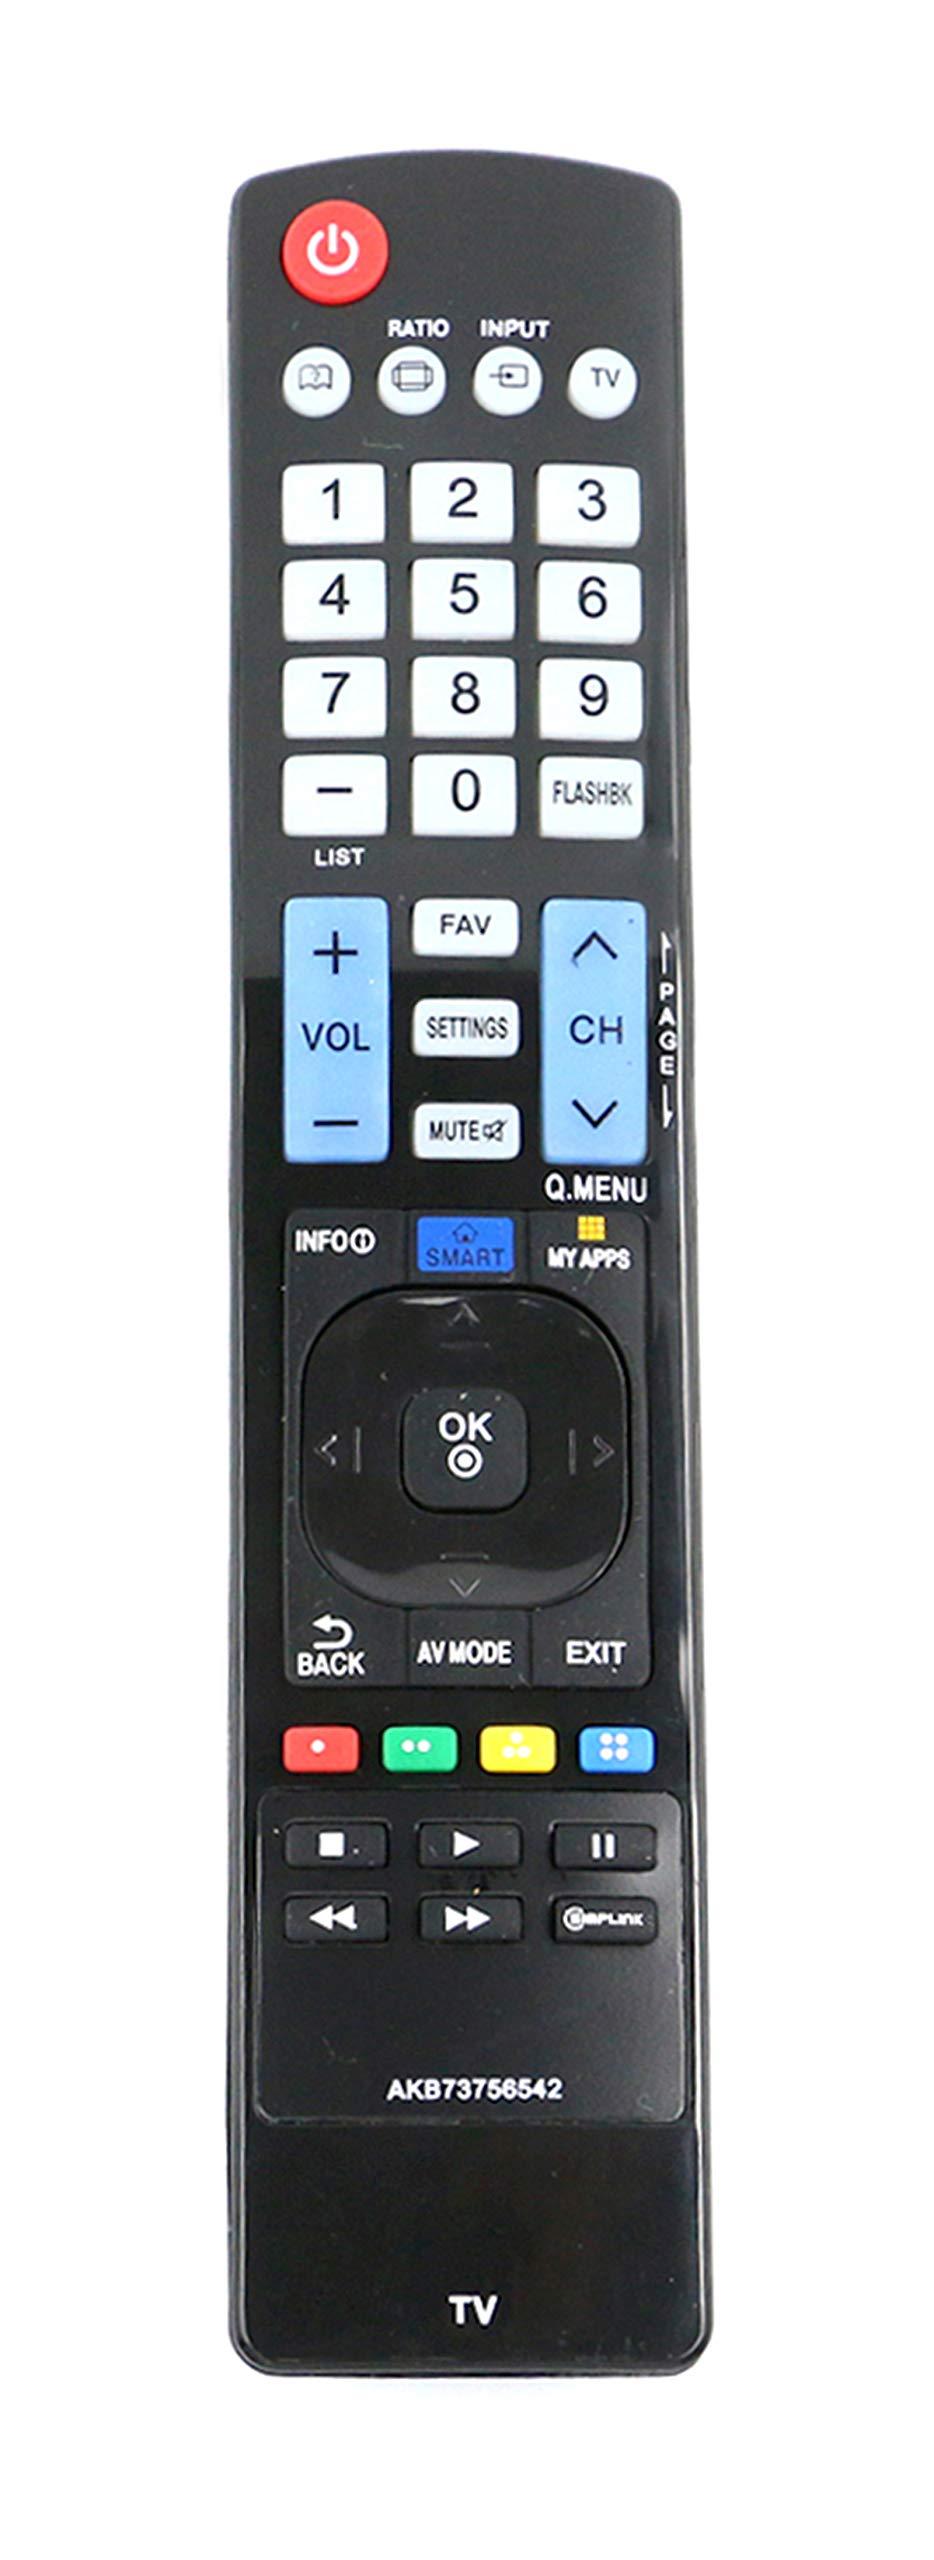 New AKB73756542 AKB73756567 Replace Remote fit for LG Smart TV 32LN570B 32LN5750 39LN5700 42LN5700 47LN5600 47LN5700 47LN5710 50LN5700 55LN5600UI 55LN5700 60LN5600UB 60LN5700 60LN5710 AGF76692608